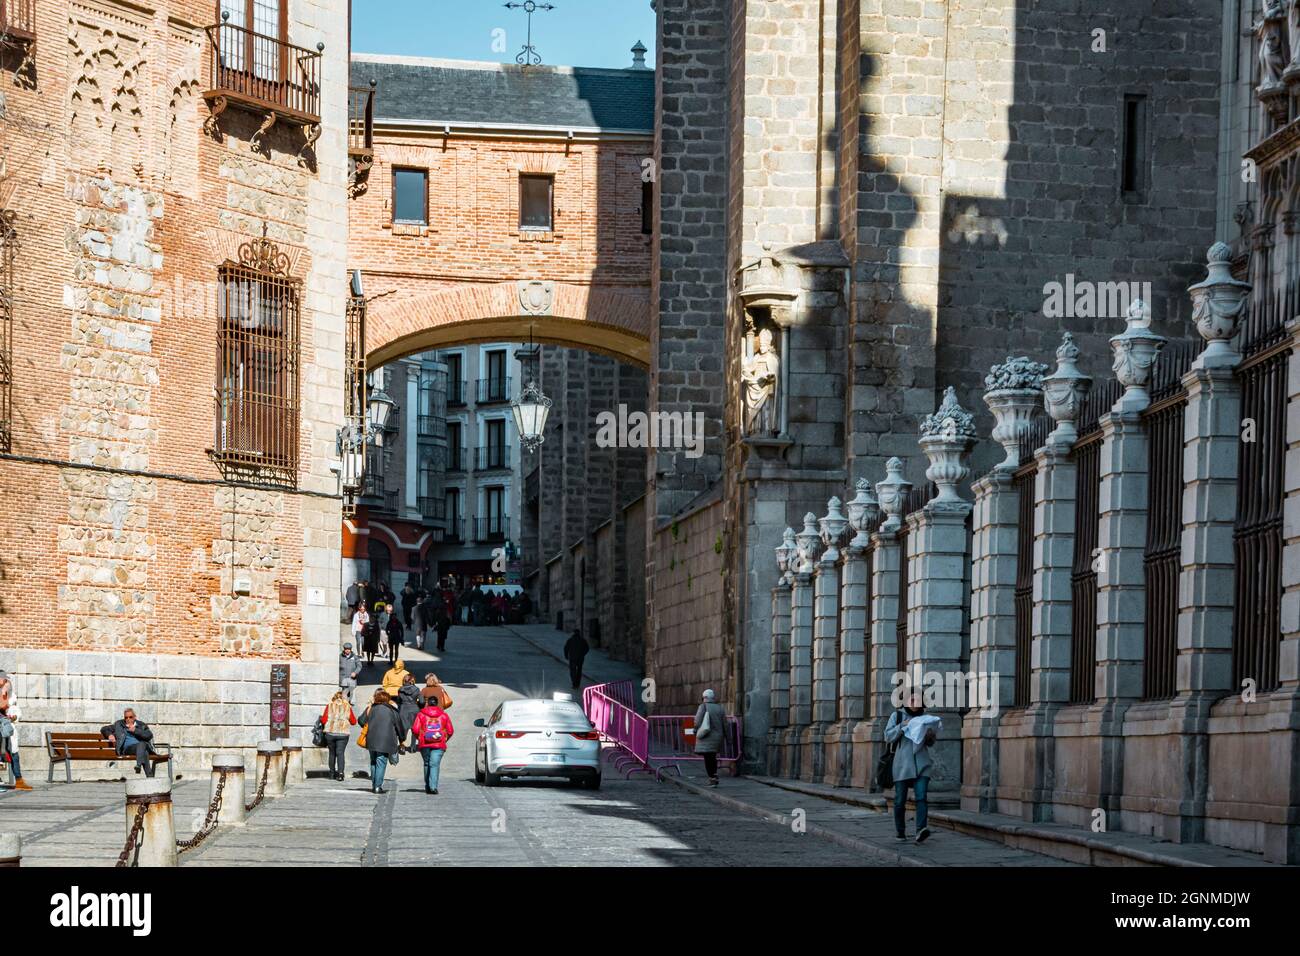 People passing through the city of Toledo. February 2019 Spain Stock Photo